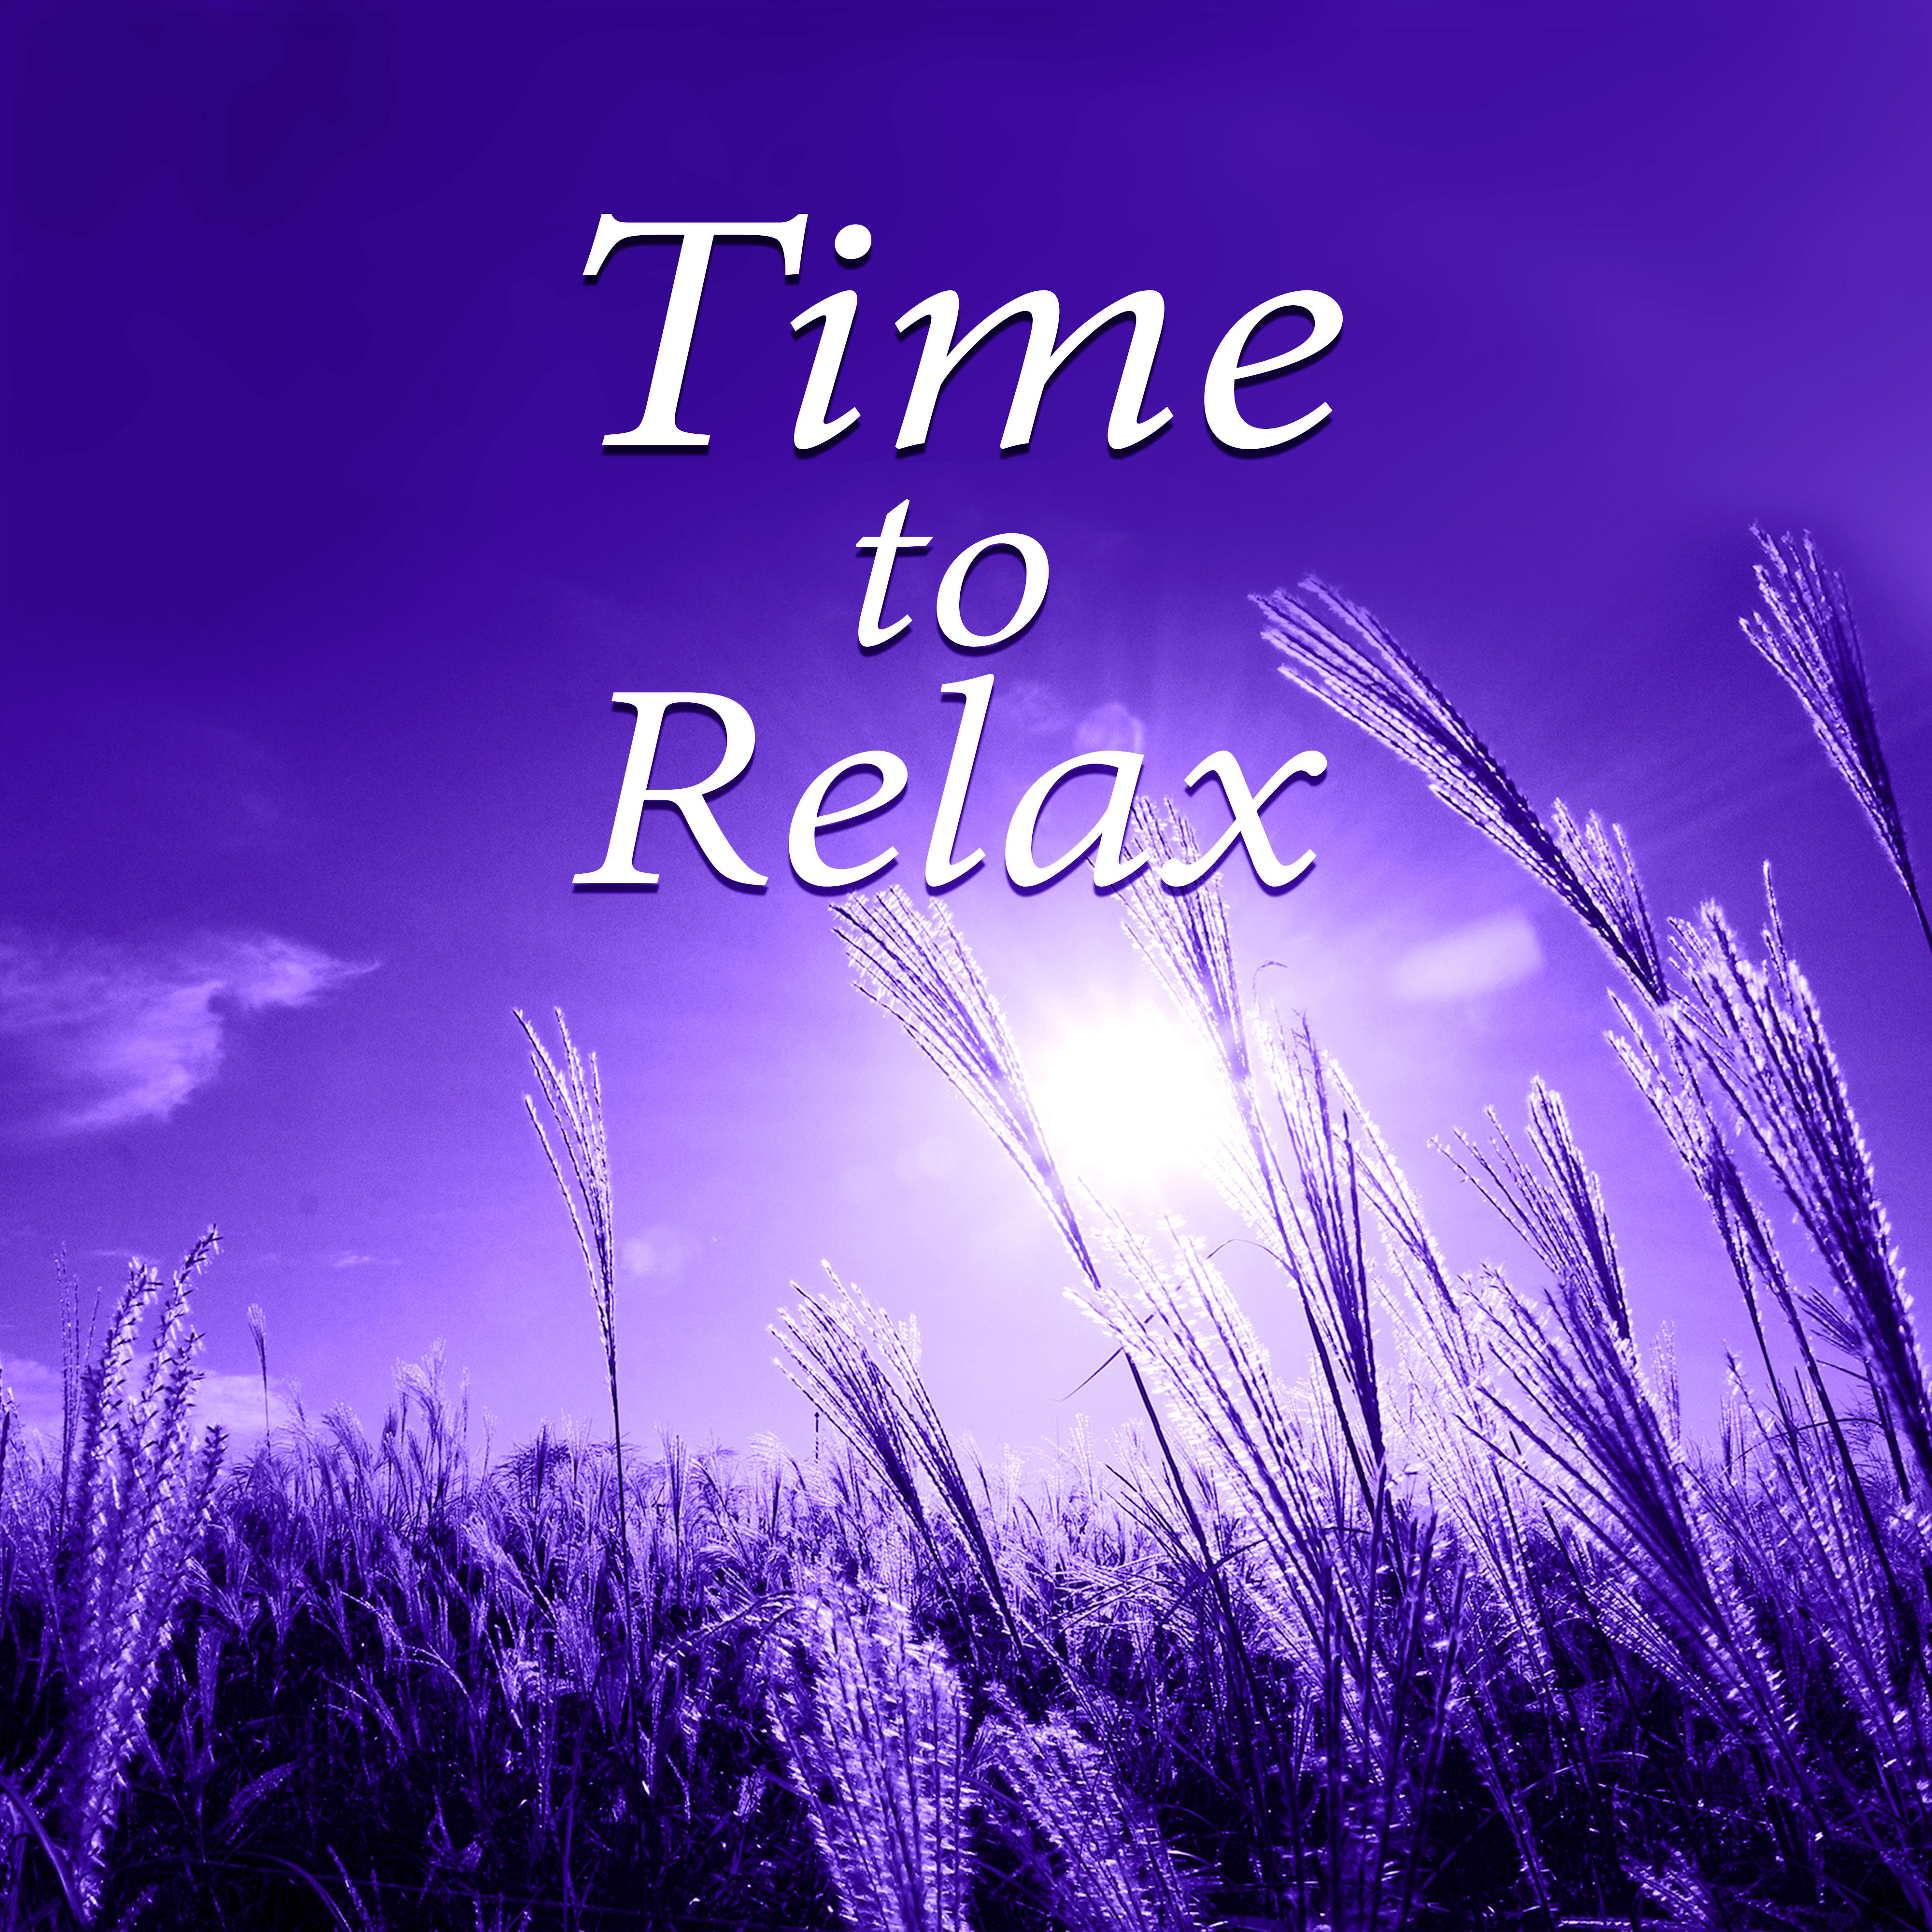 Time to Relax - Hindu Yoga, Mindfulness Meditation & Relaxation with Flute Music and Nature Sounds, Inspiring Piano Music